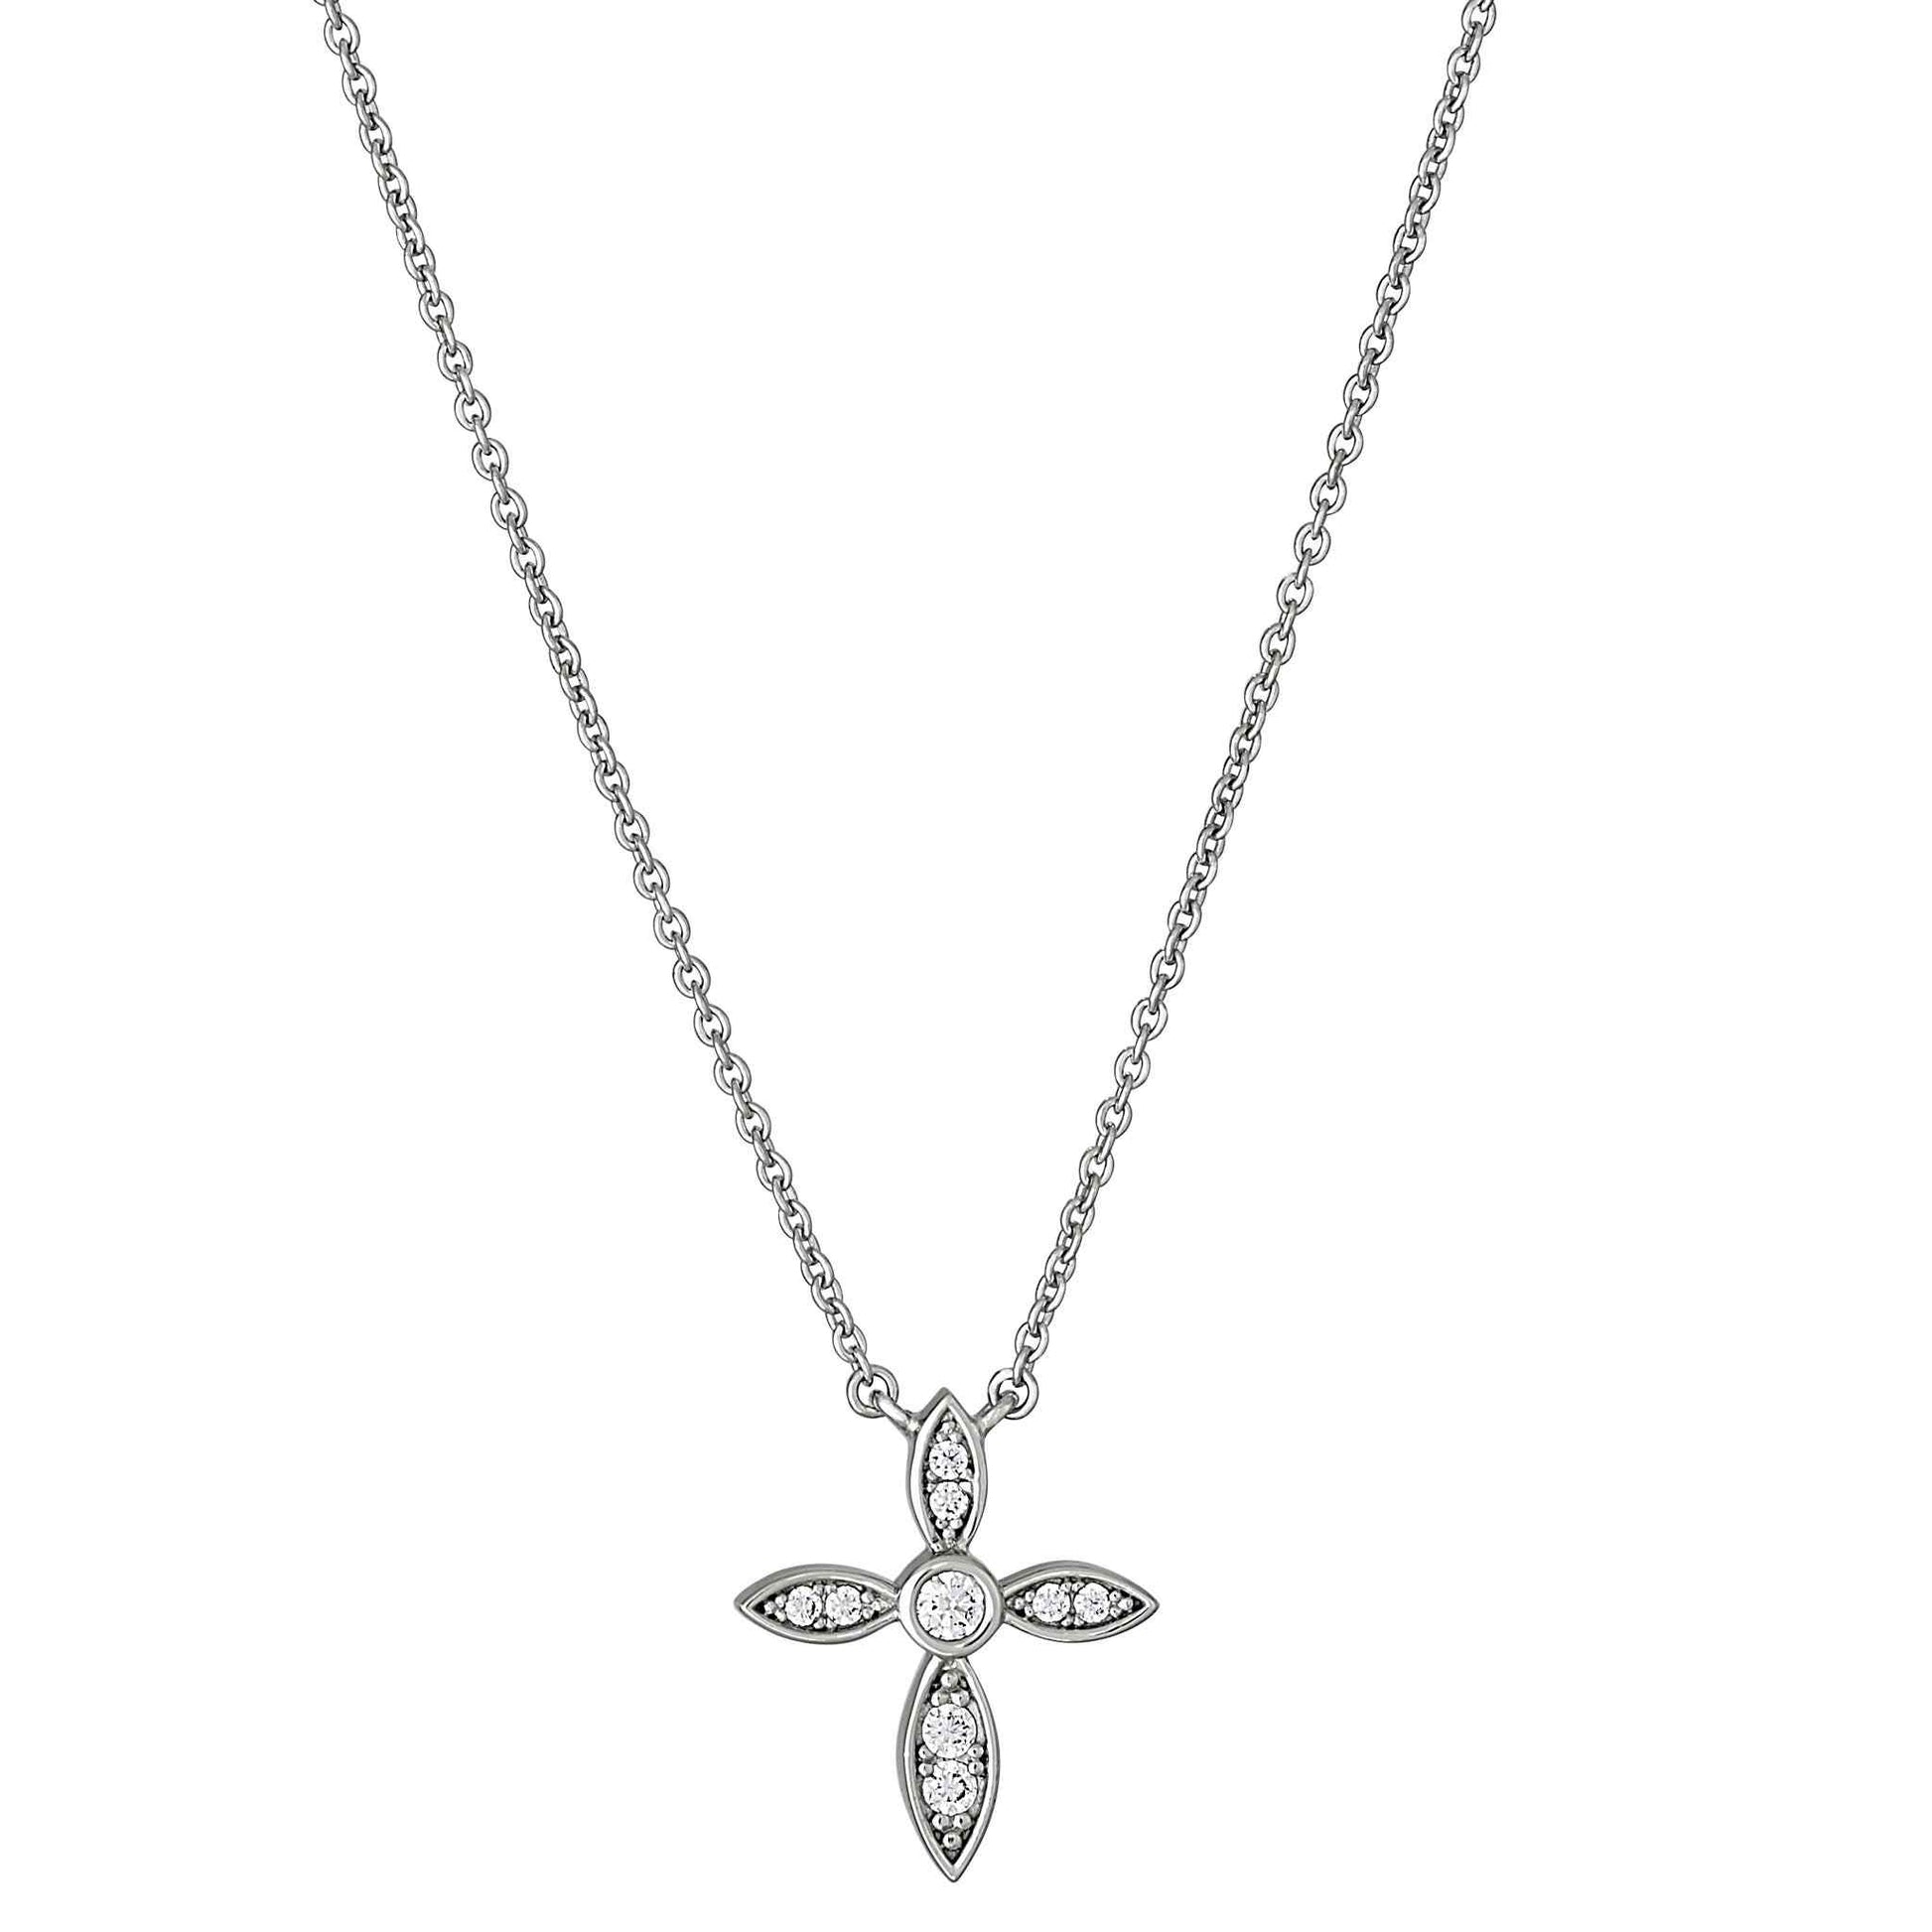 A marquise cross necklace with simulated diamonds displayed on a neutral white background.